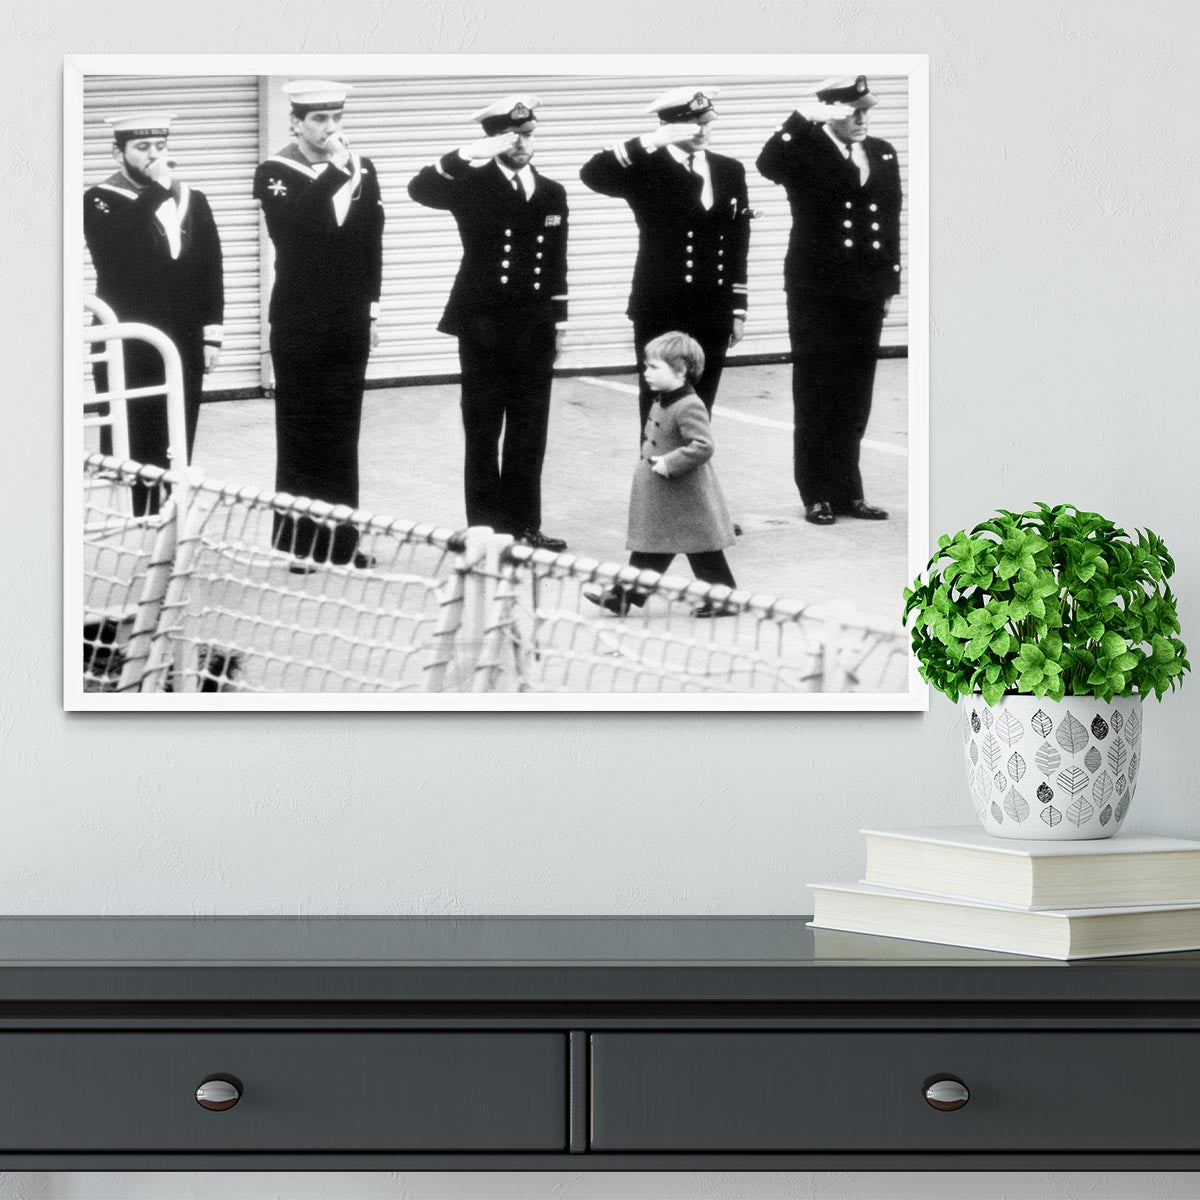 Prince William visiting the Royal Navy as a small child Framed Print - Canvas Art Rocks -6